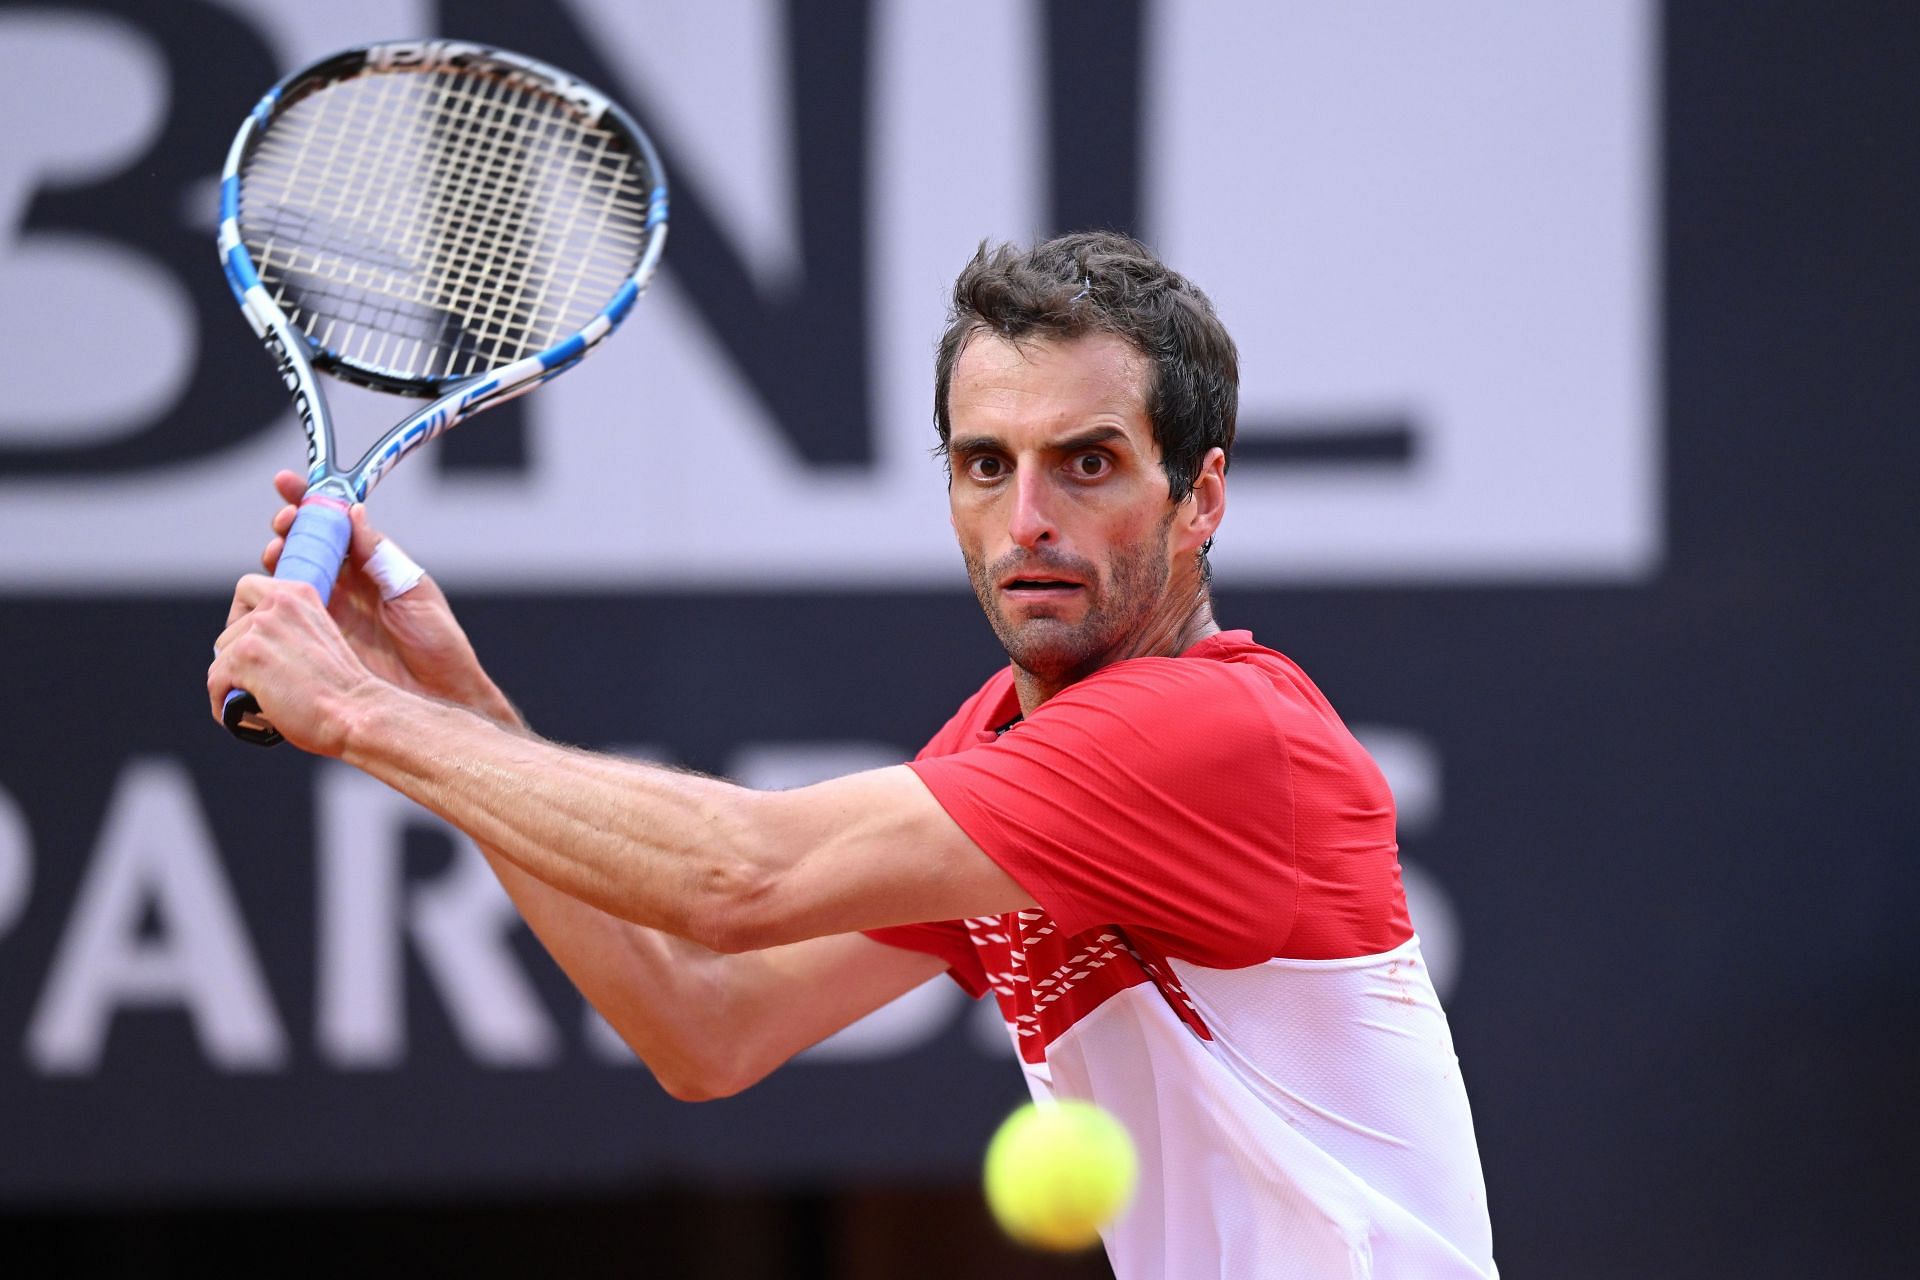 2 things that stood out in Albert Ramos-Vinolas' 1R win over Fabio Fognini at the Swiss Open